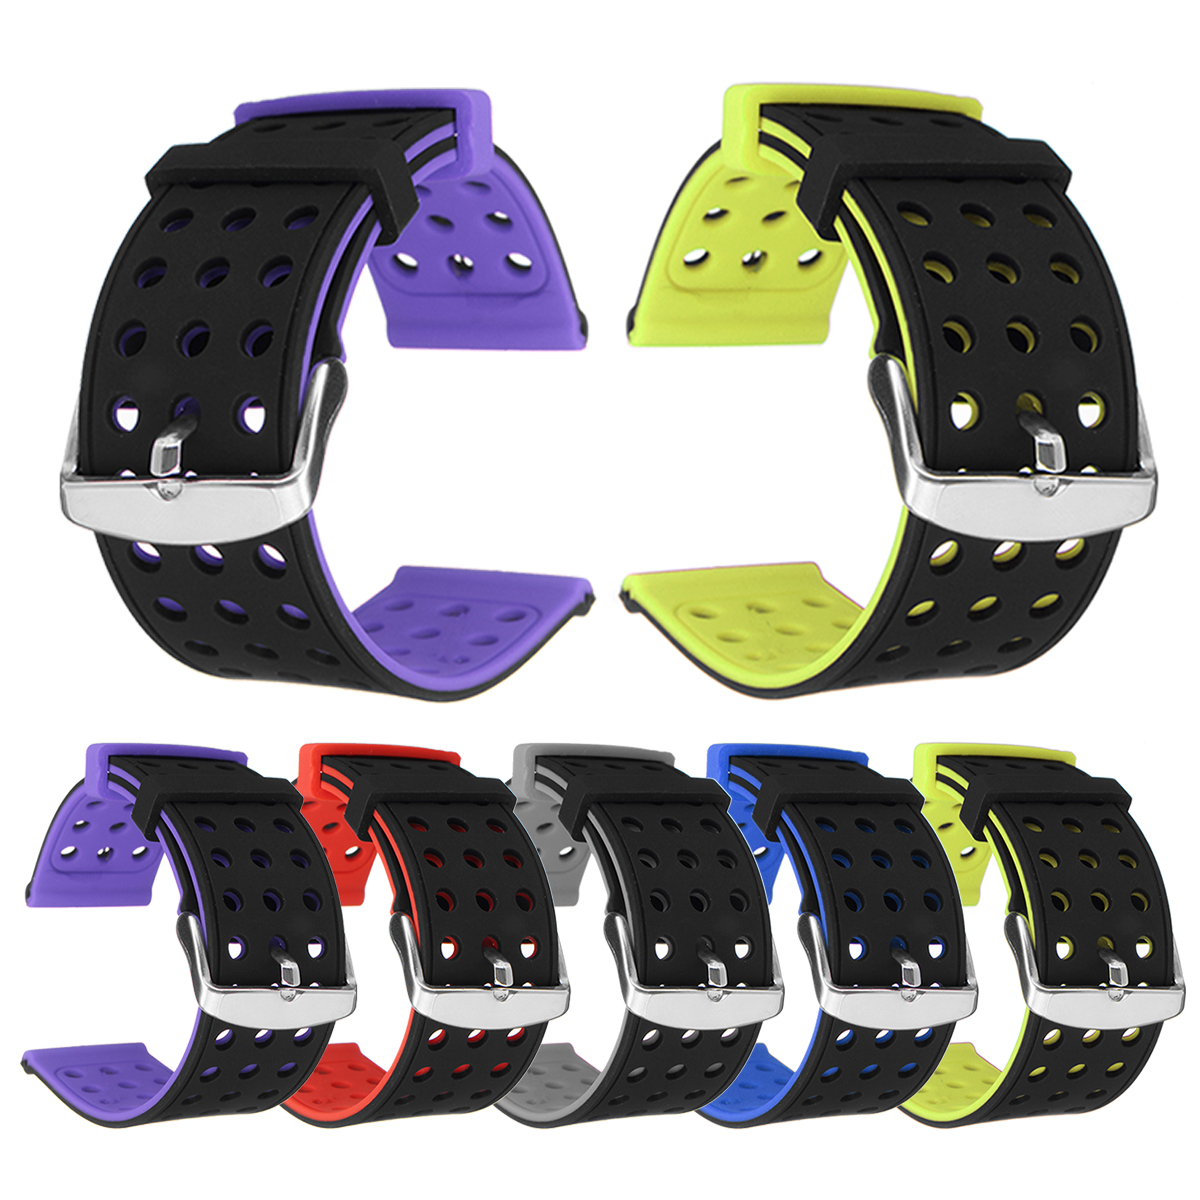 Bakeey Replacement Silicone Rubber Classic Smart Watch Band Strap For Fitbit Versa 1